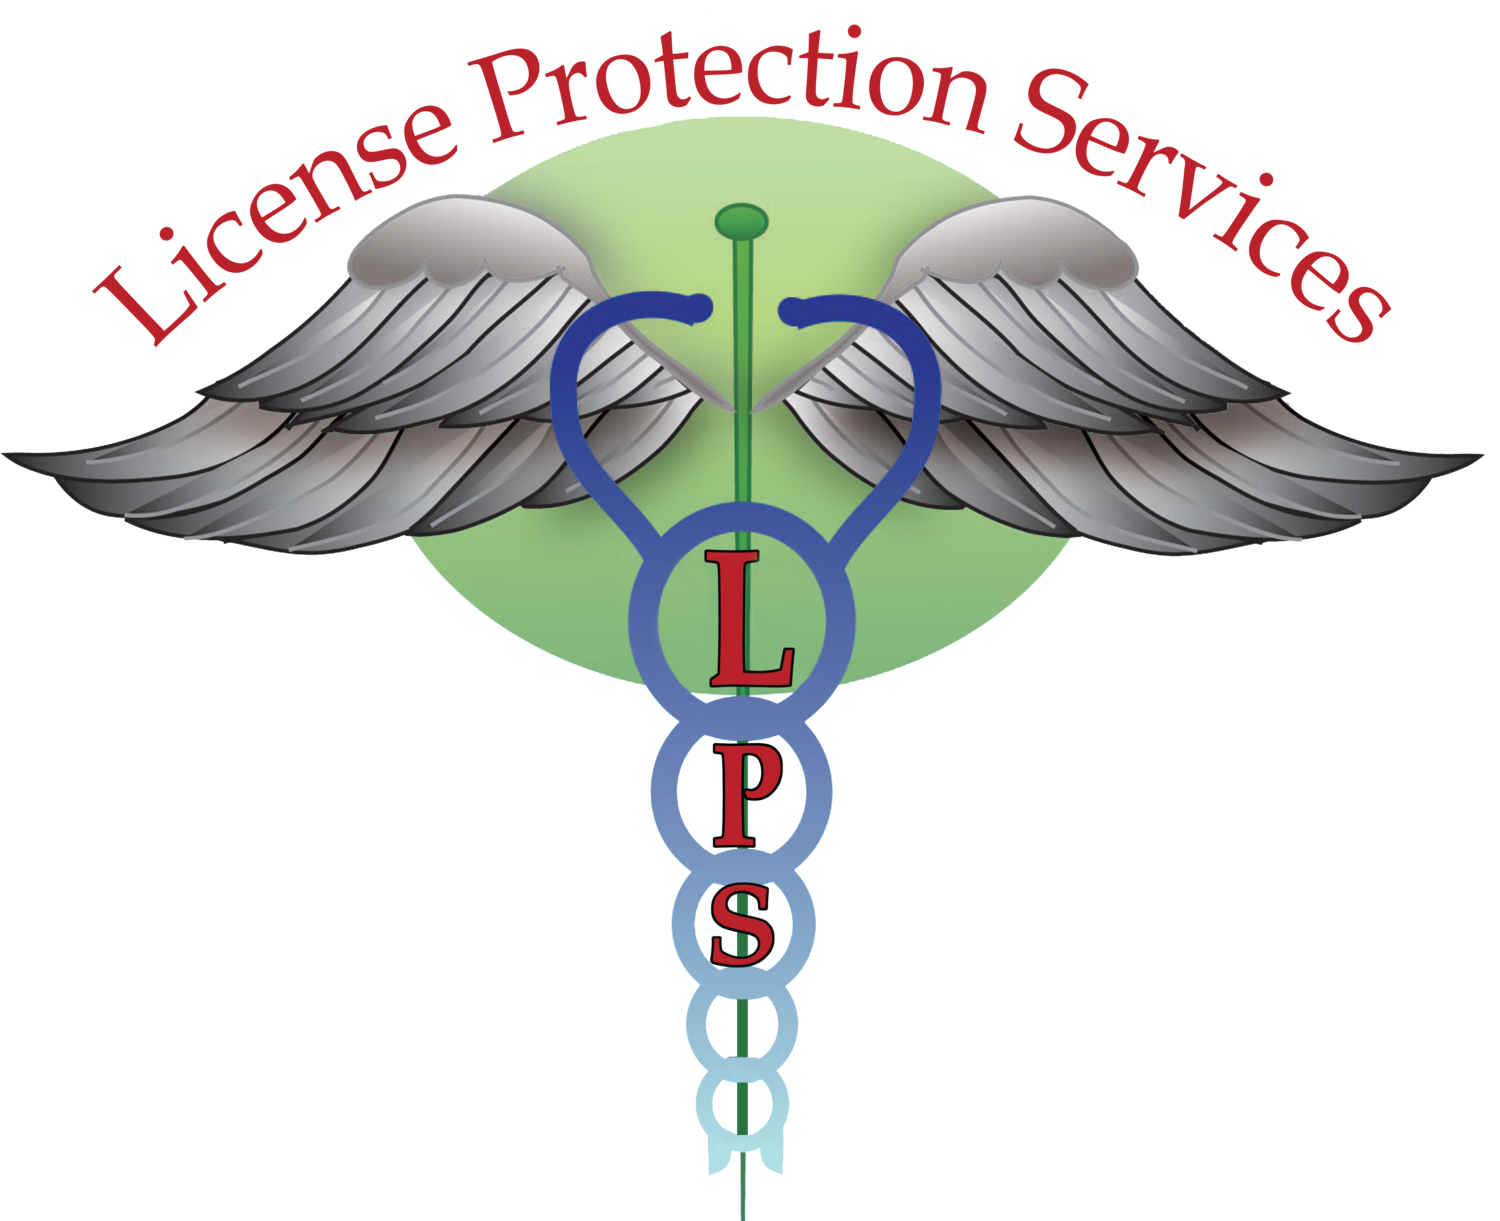 License Protection Services